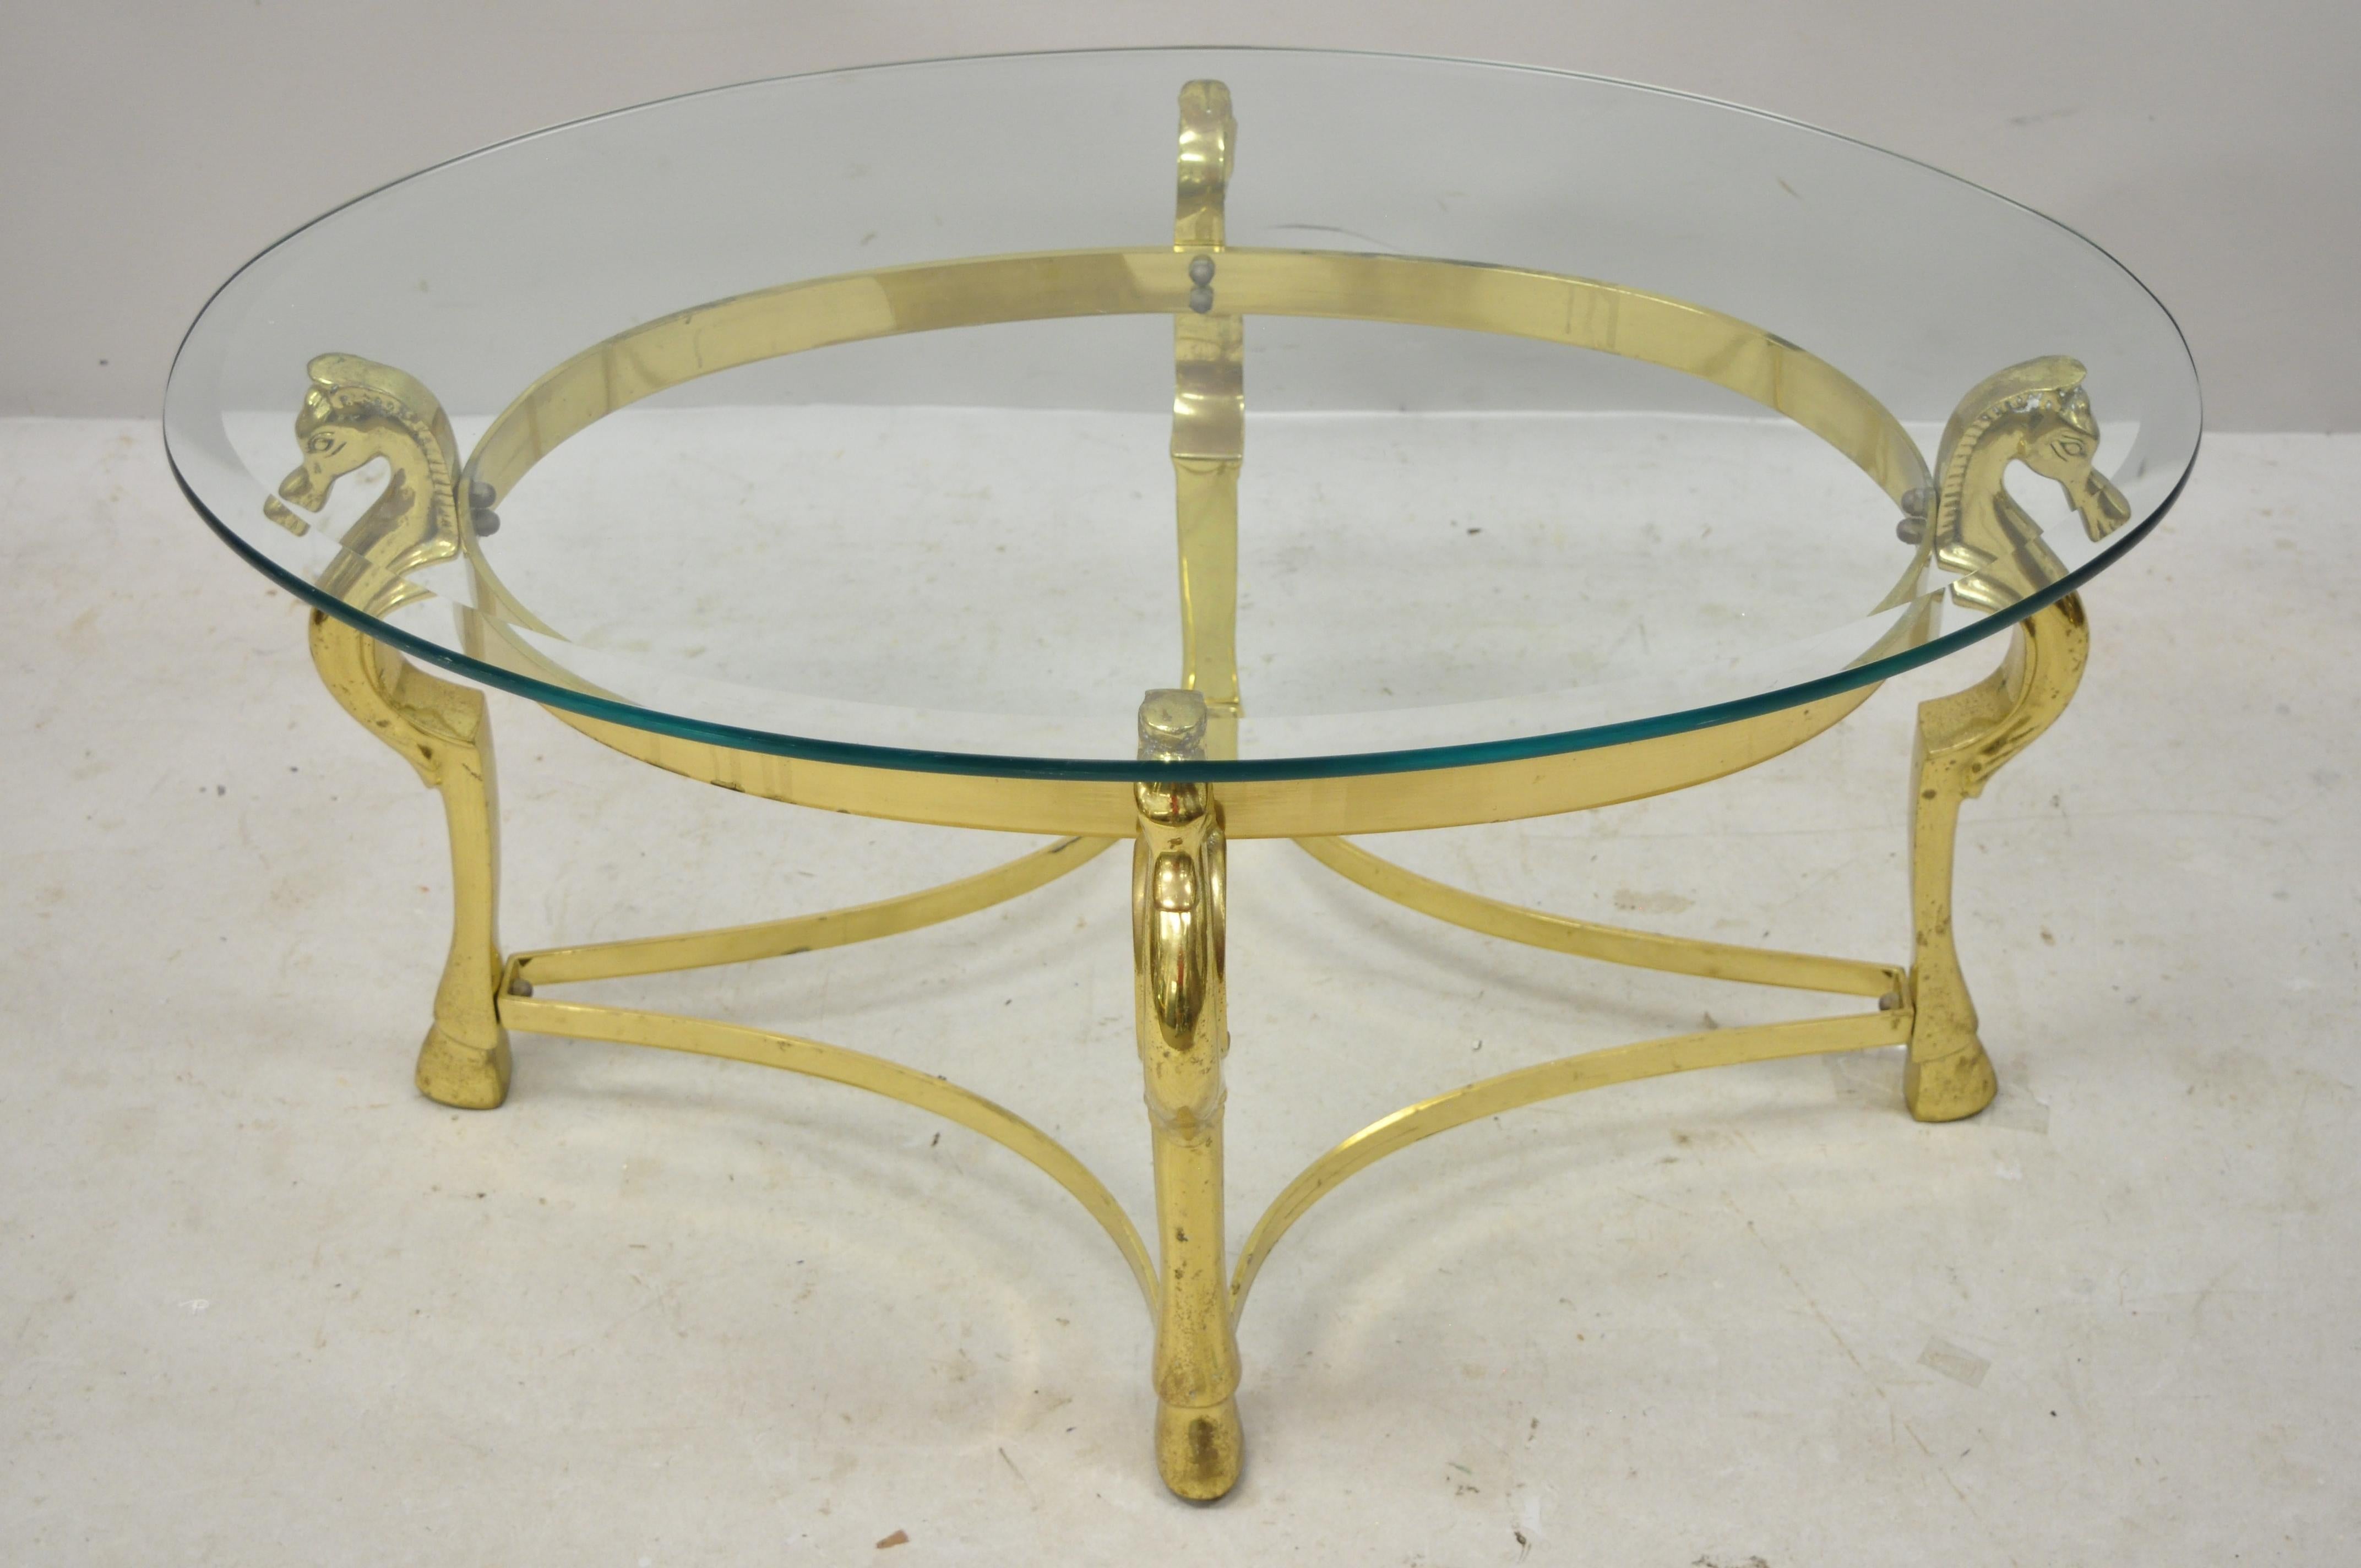 Vintage Italian Hollywood Regency brass seahorse small oval glass top coffee table. Item features a small oval frame, seahorse accents, heavy solid brass construction, original label, oval beveled glass top, great style and form,
circa mid-20th